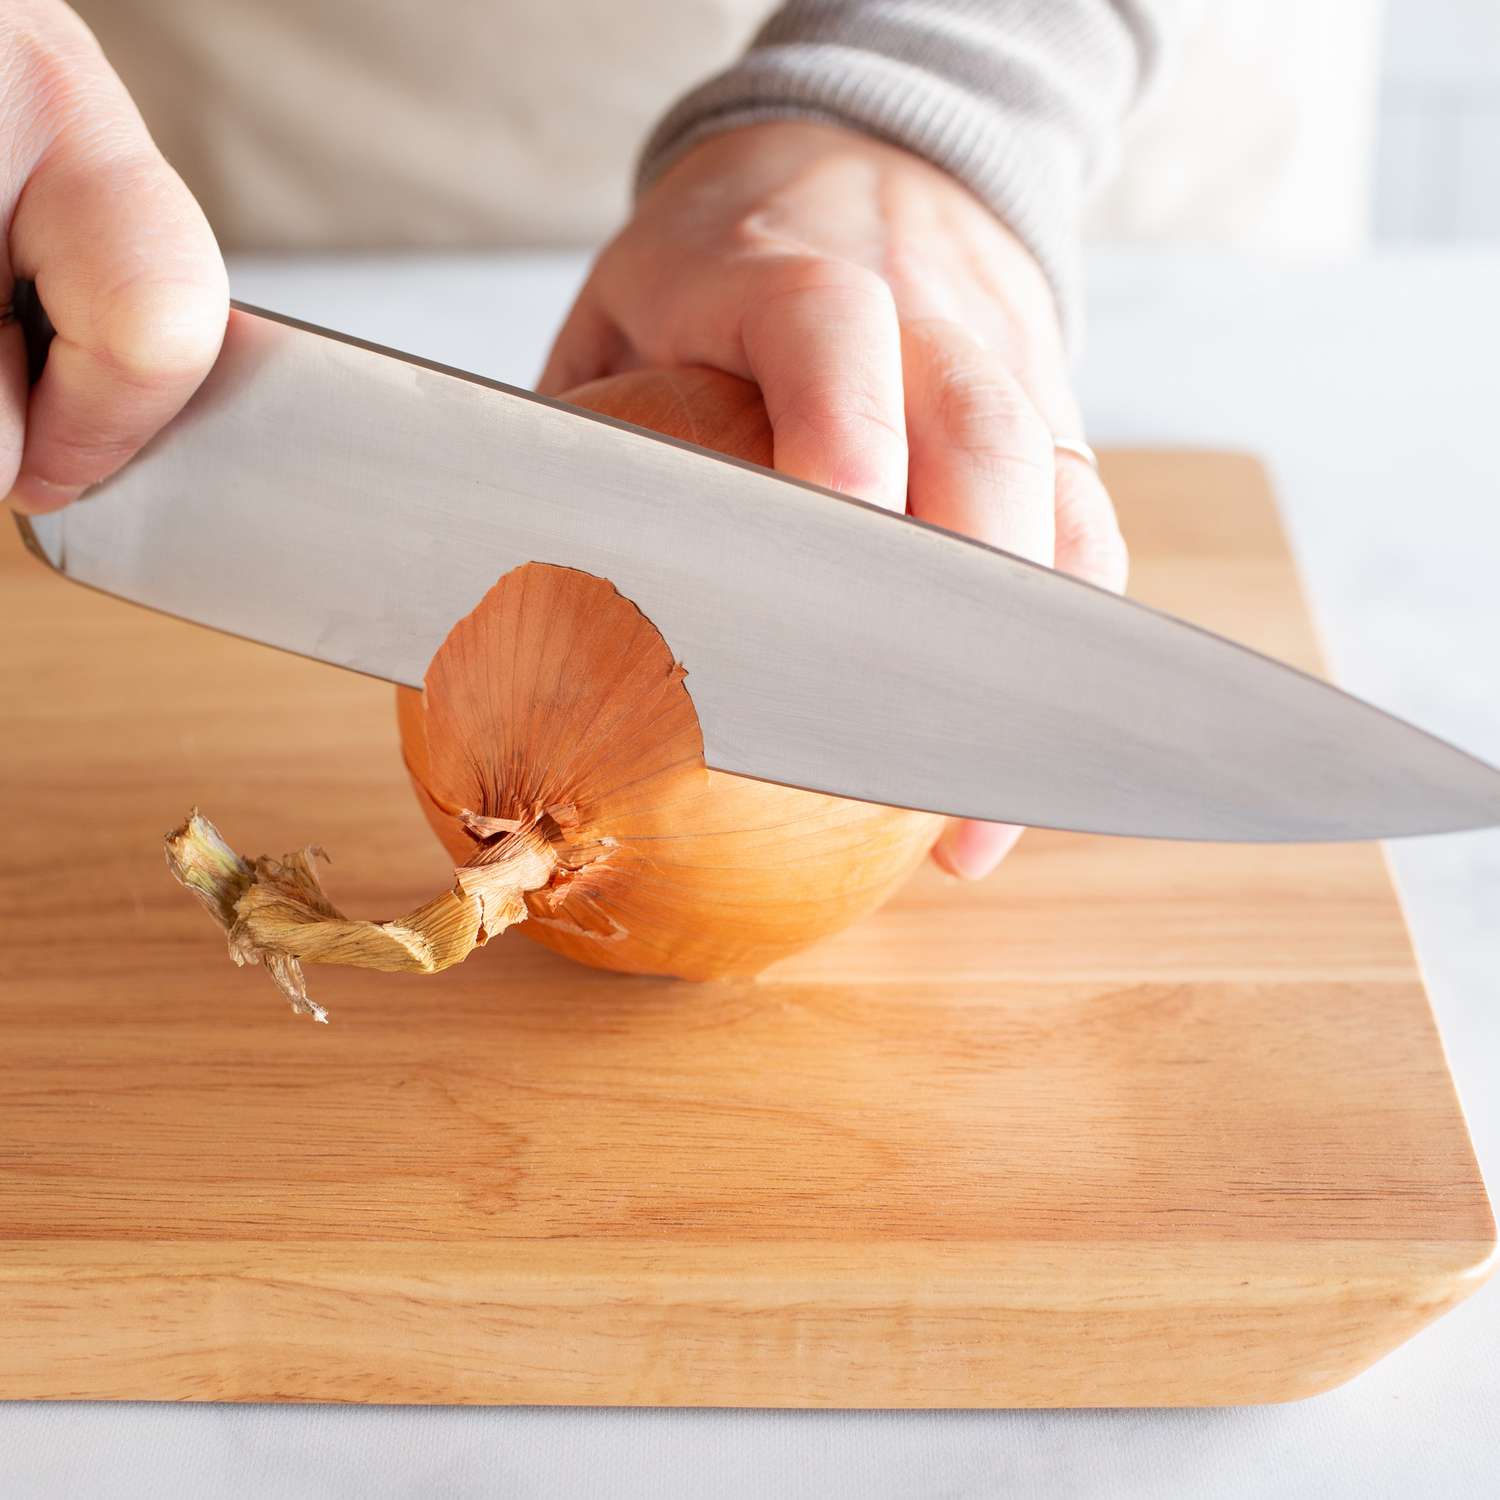 A knife cutting off the end of an onion